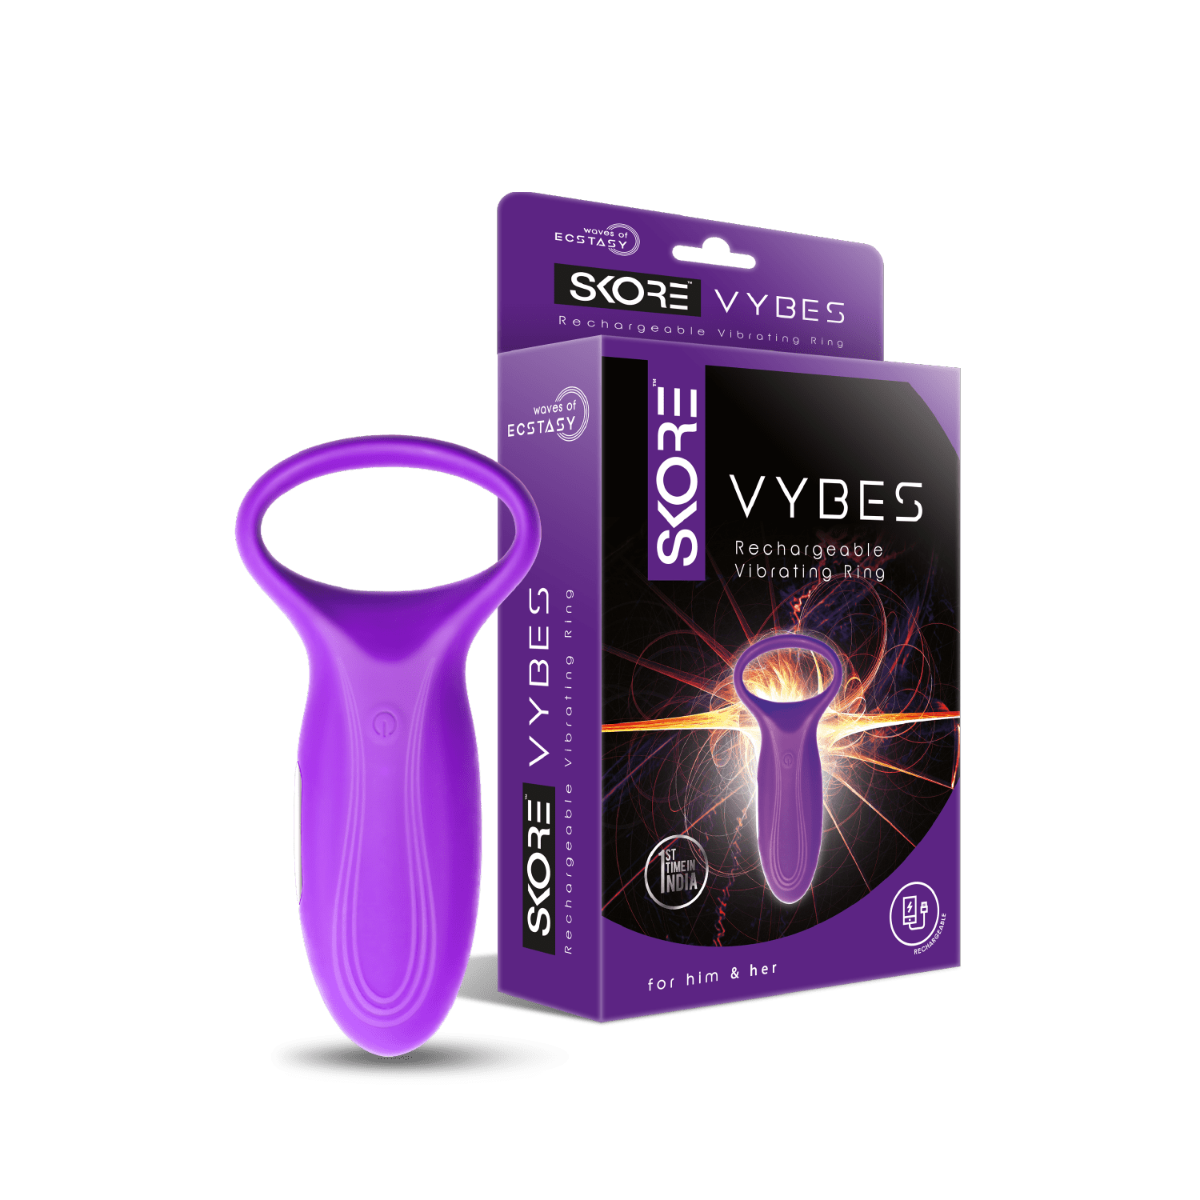 Tirannie Inloggegevens Asser Skore Vybes - Rechargeable Vibrating Ring For Him & Her | Skore Condoms